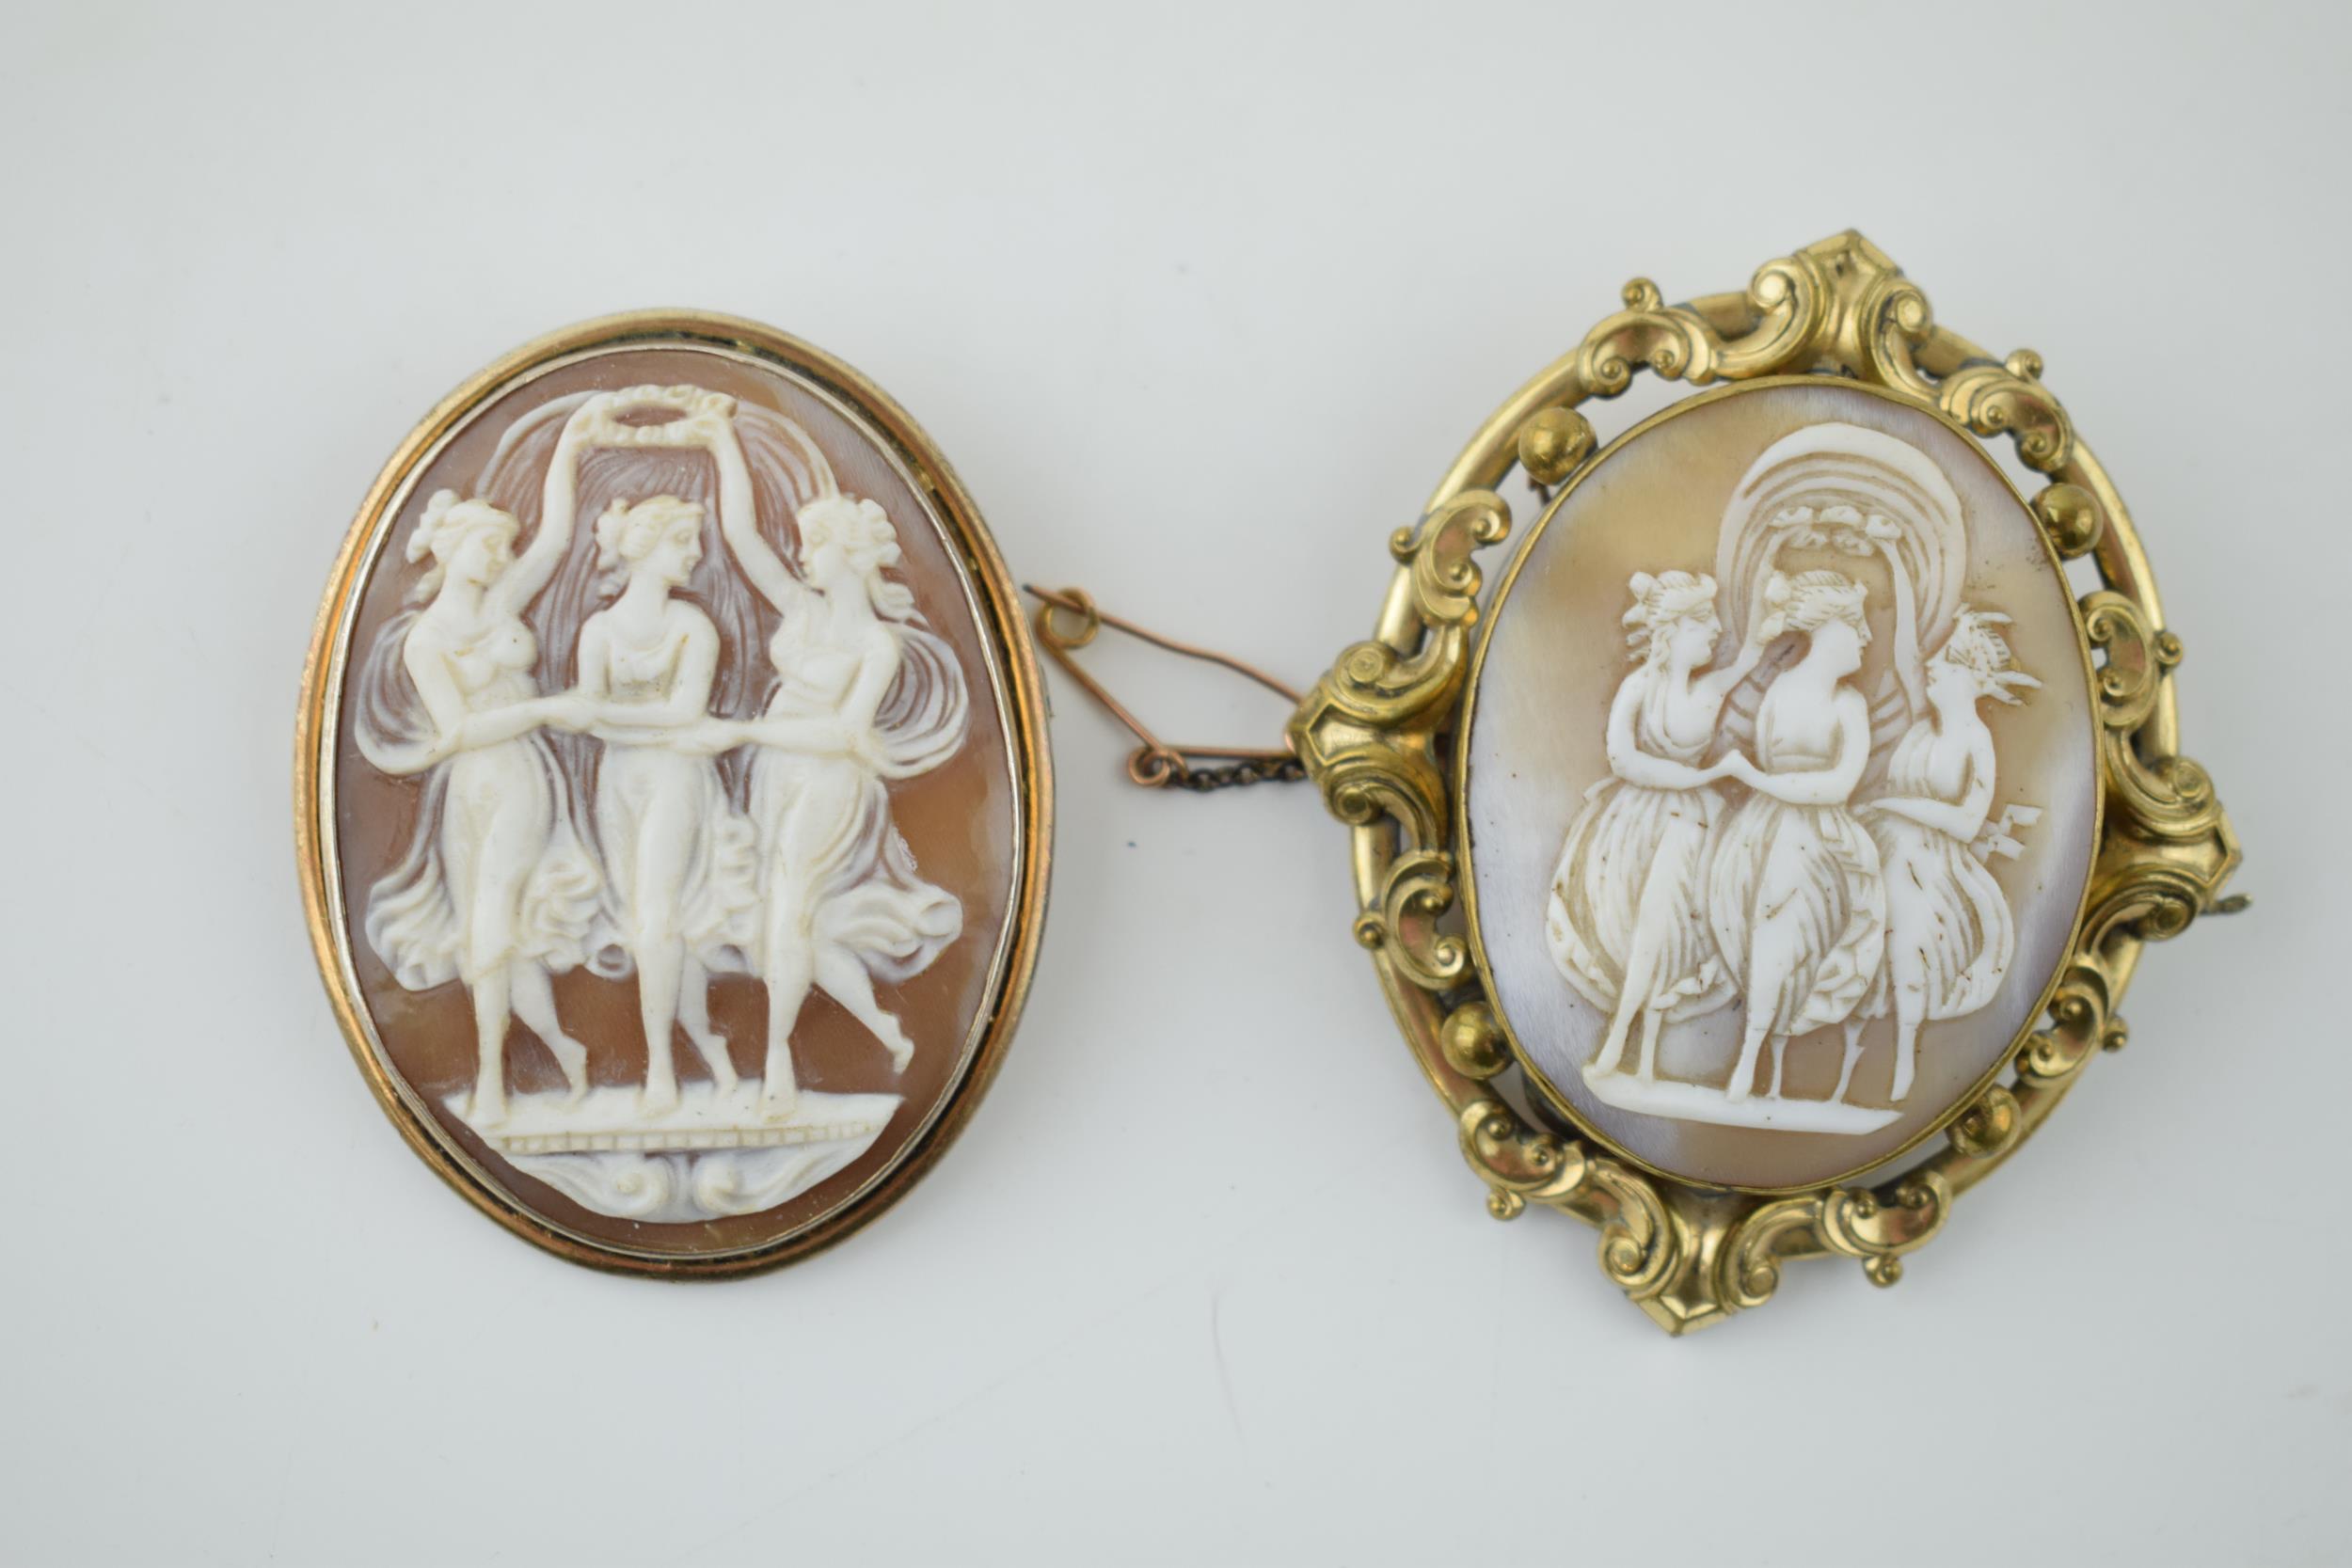 A pair of vintage cameo brooches, both depicting the three graces, metal frames (2), 6cm tall.